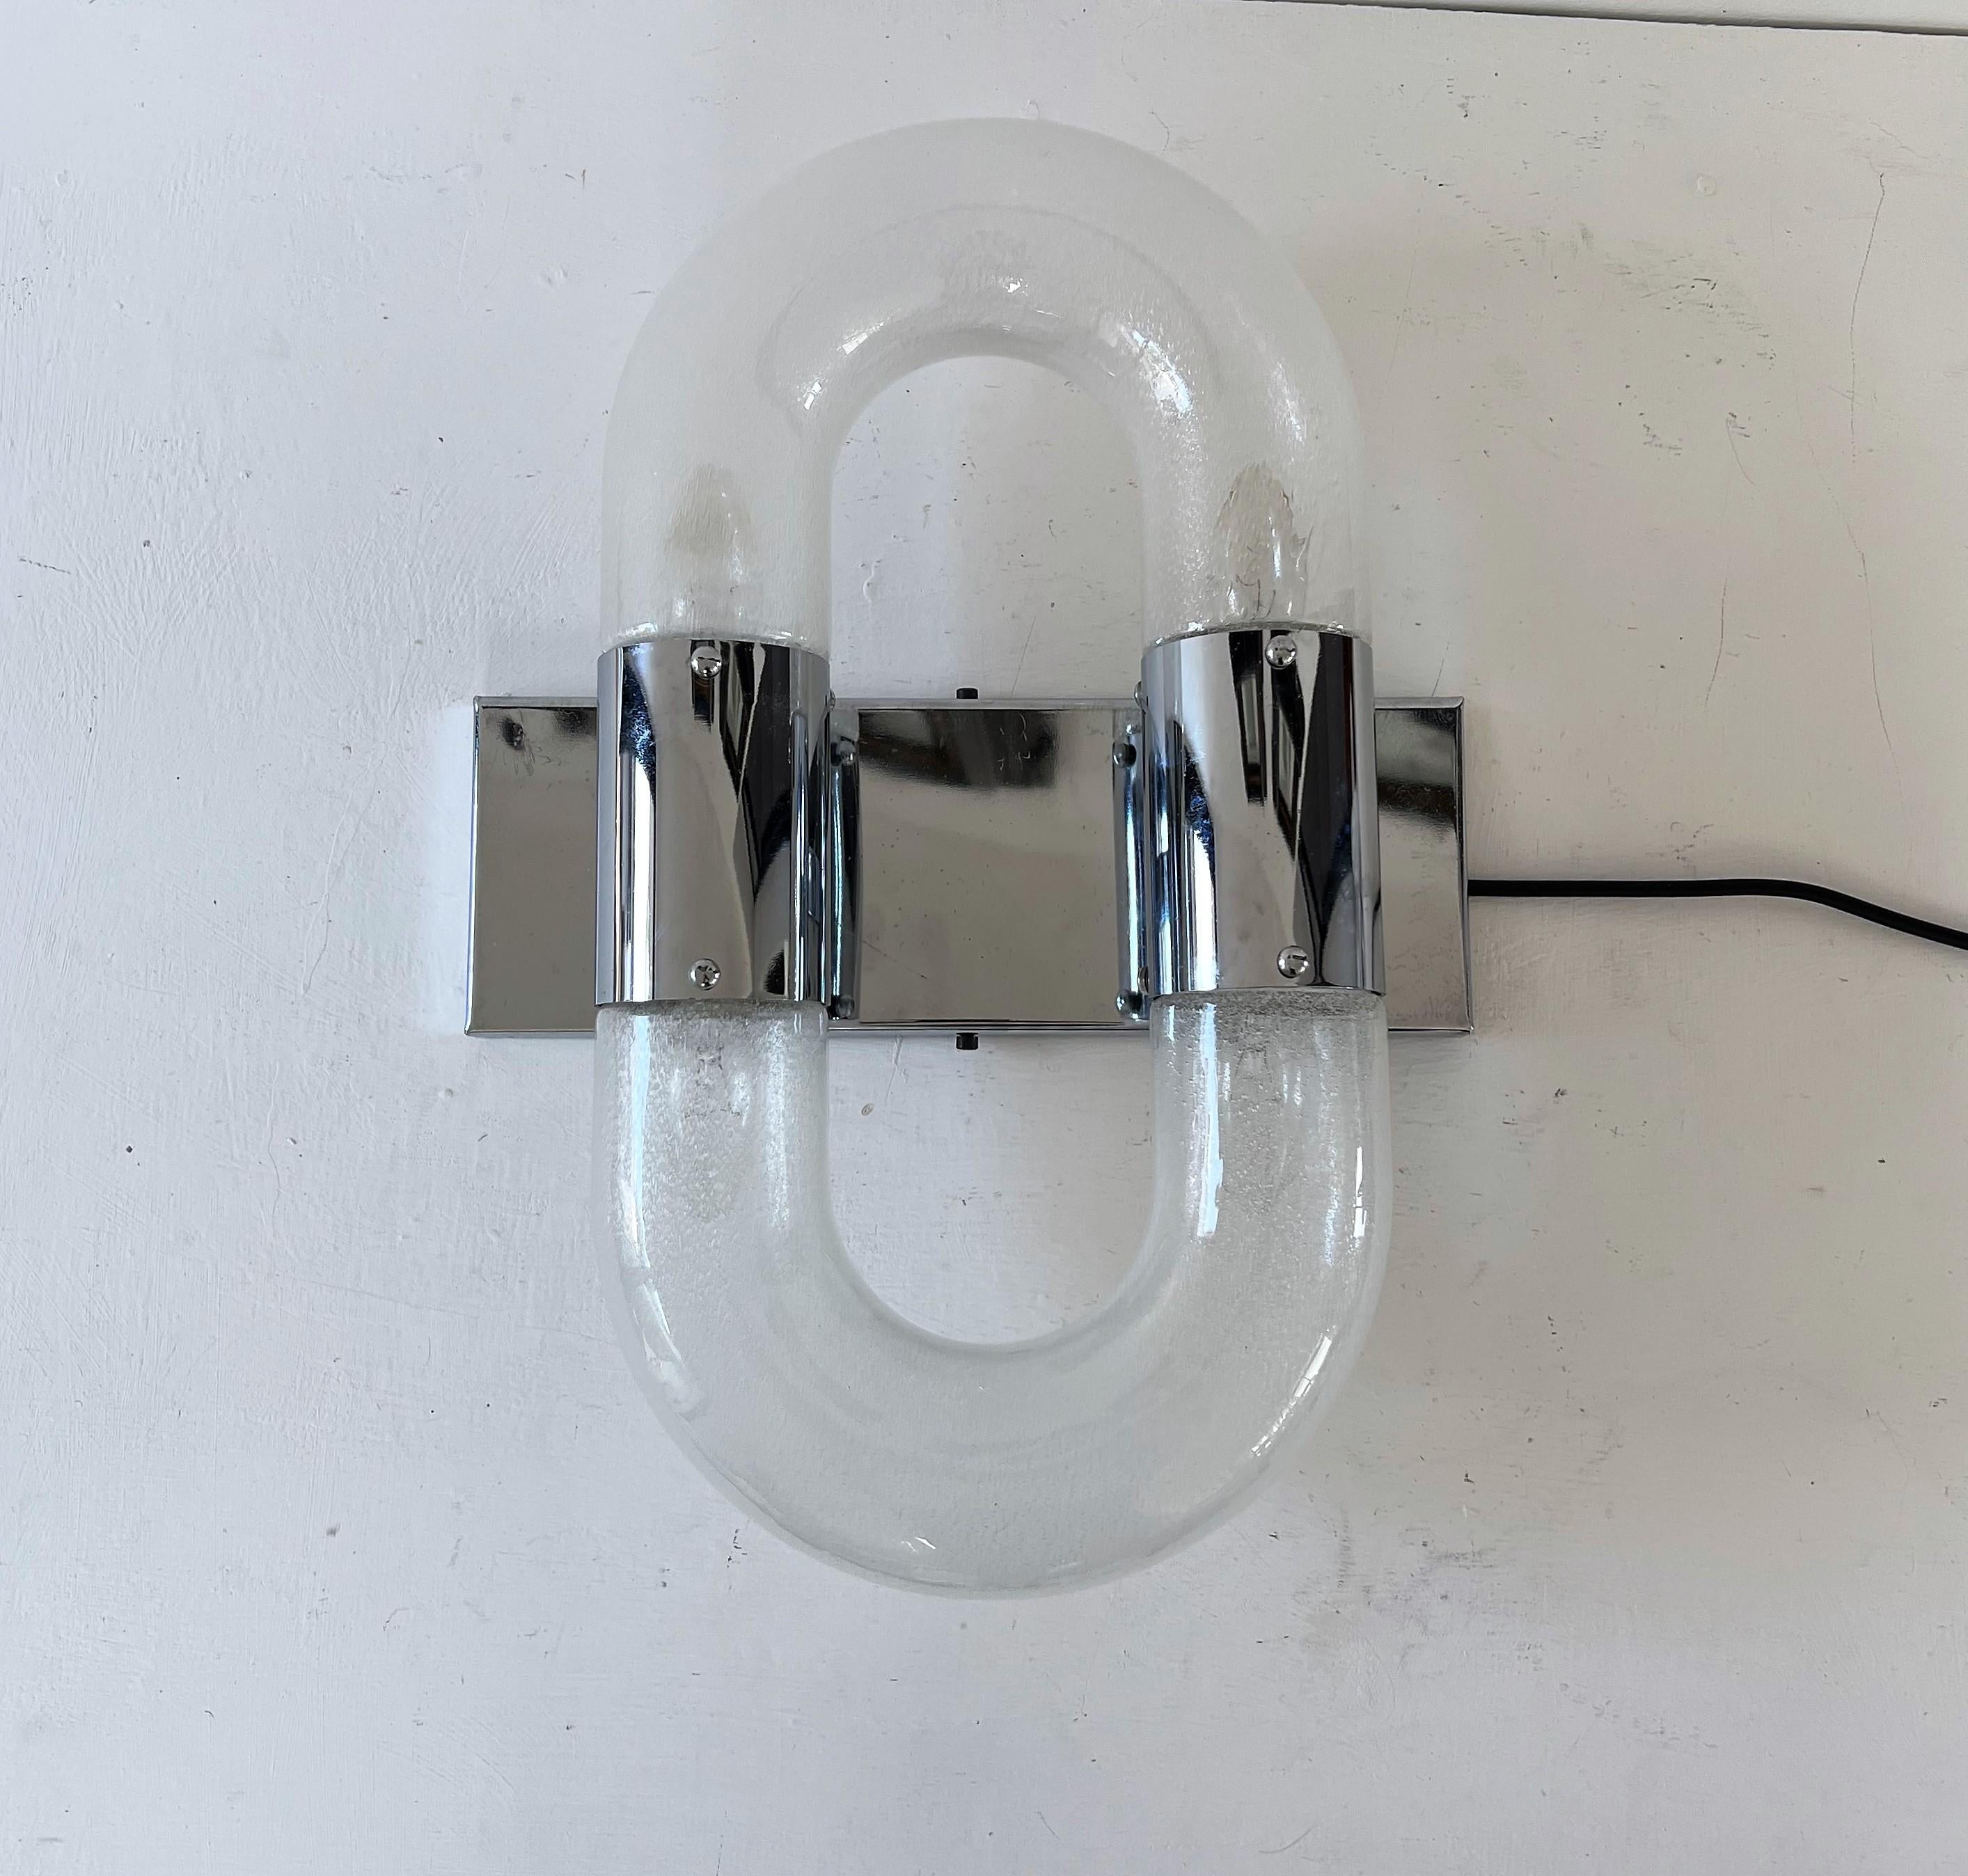 Space Age four-light sconce designed by Aldo Nason, circa 1970 in Murano glass in the 'Pulegoso' technique and a chromed metal hardware.
We have two available, priced individually.